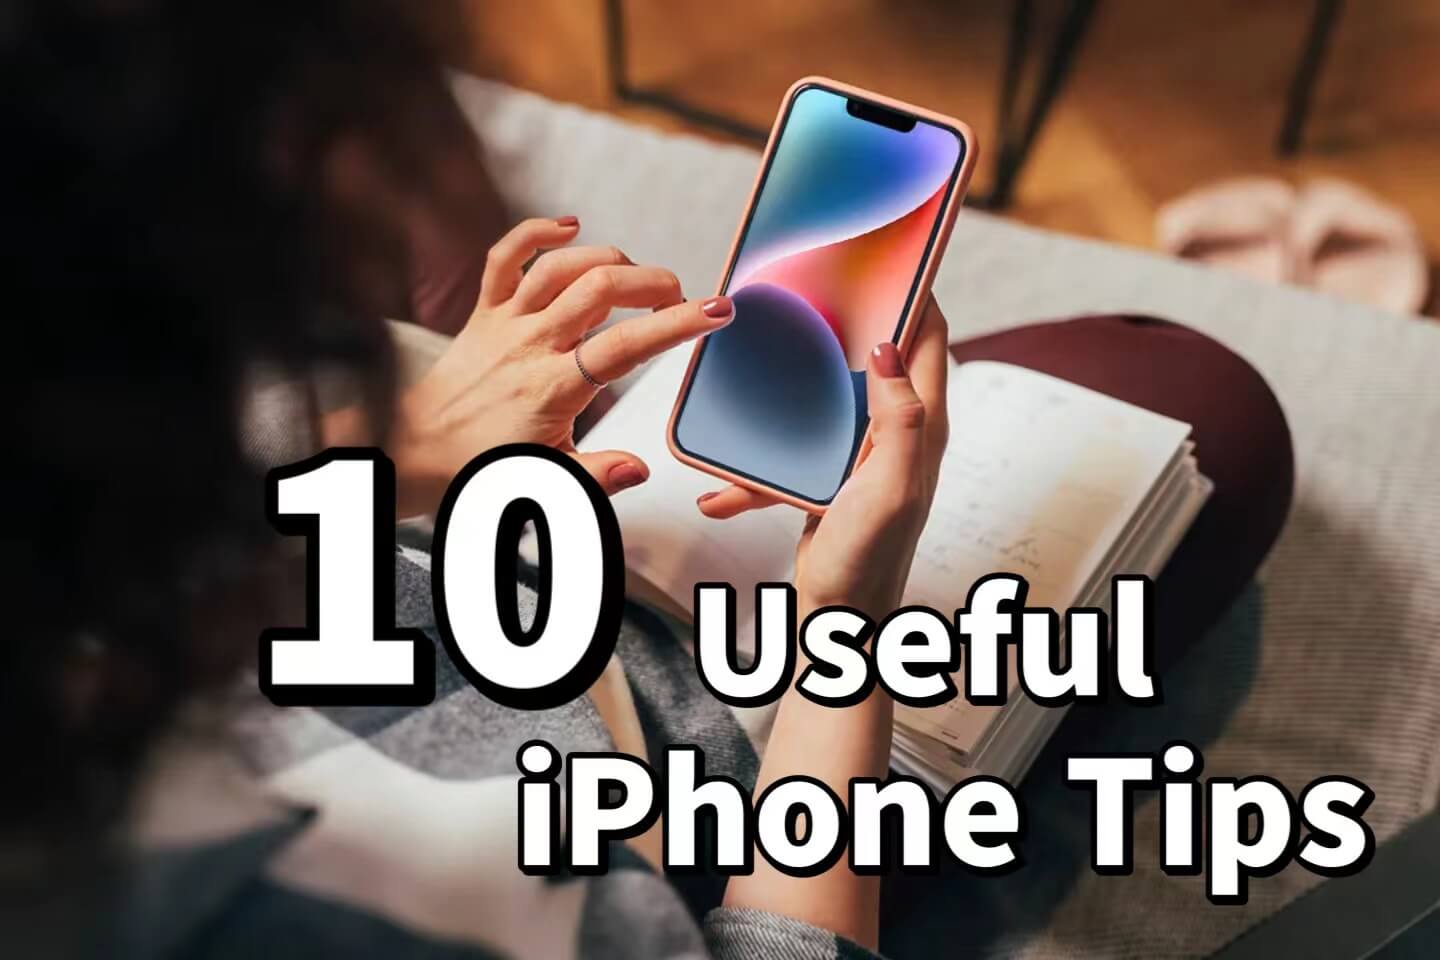 10 Hidden iPhone Tips and Tricks You Need to Know